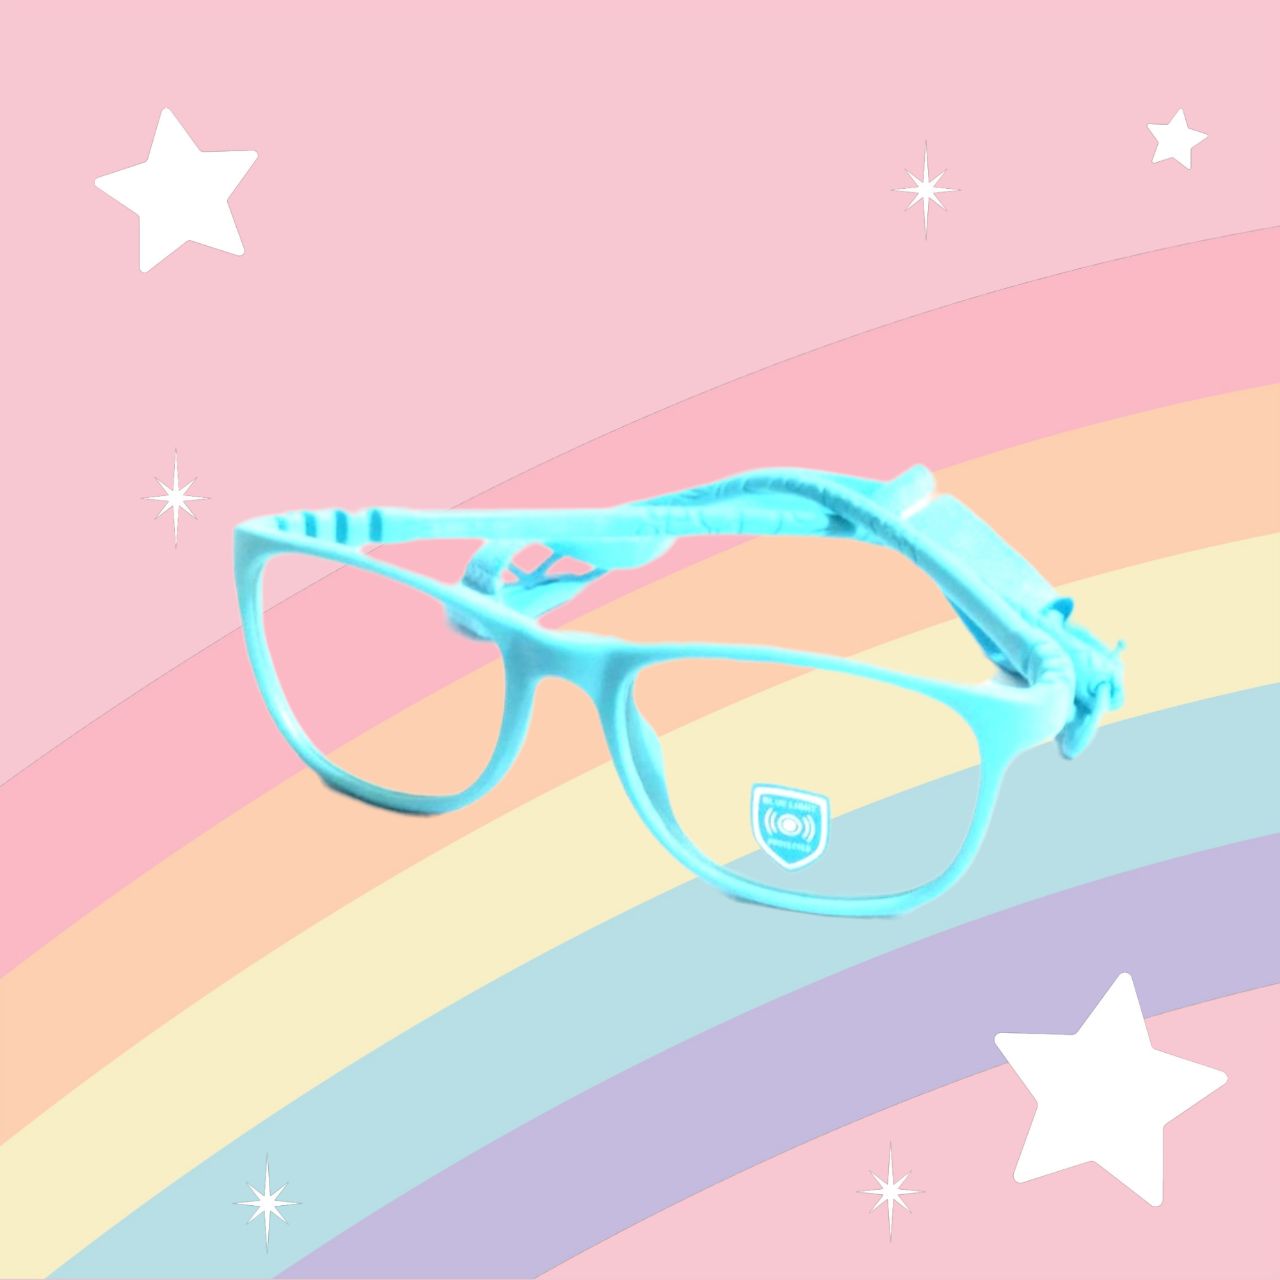 Light Blue Trendy Unbreakable Kids Flexible Glasses Age 4 to 7 Years